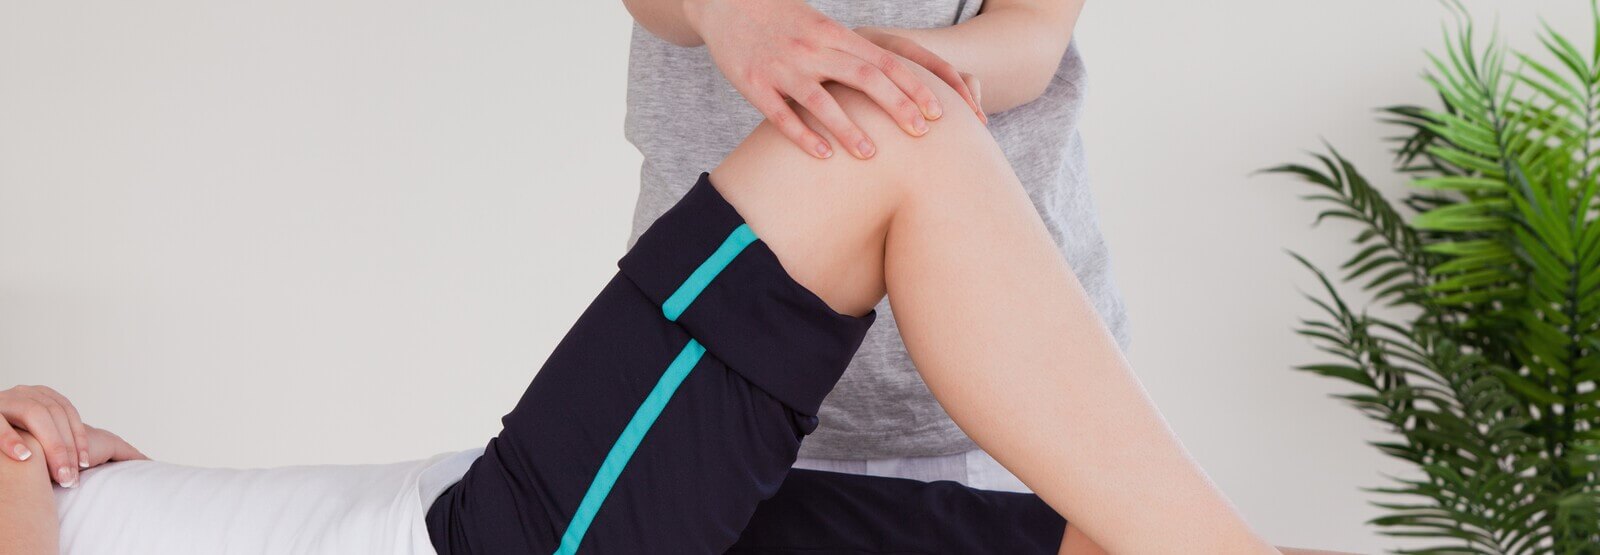 woman getting her knee checked for hyper extended knee